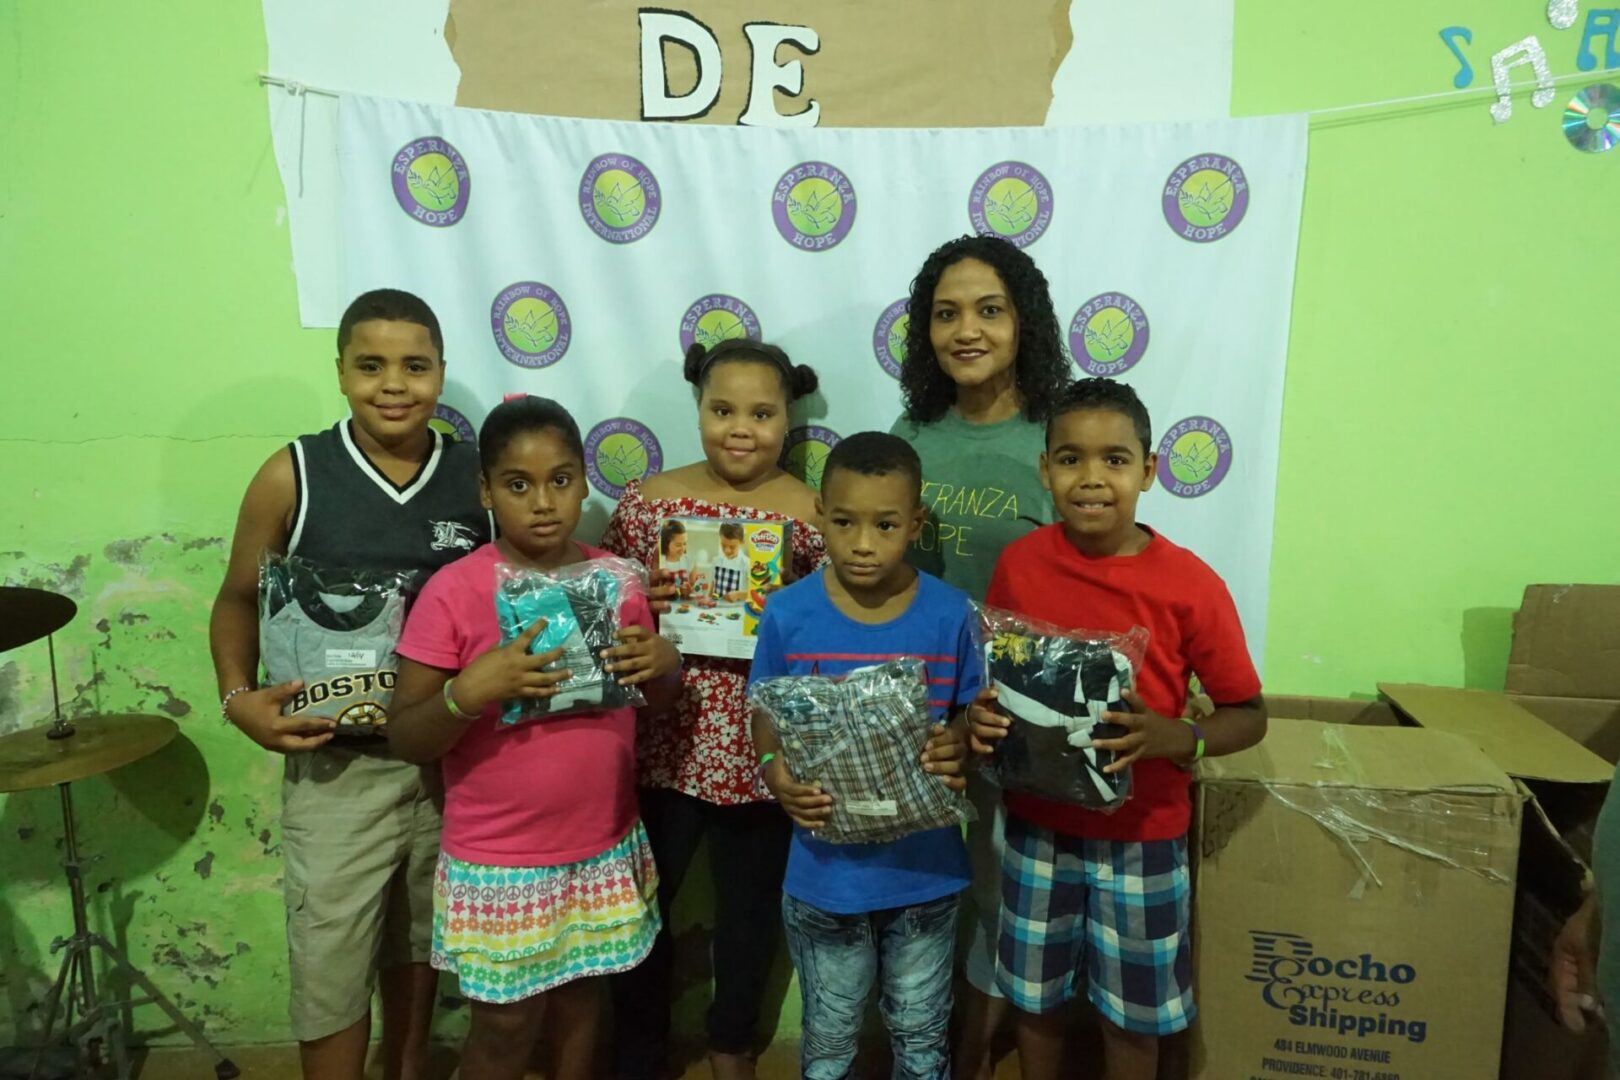 A staff and a group of children holding packs of clothes, standing against a cloth with our logo